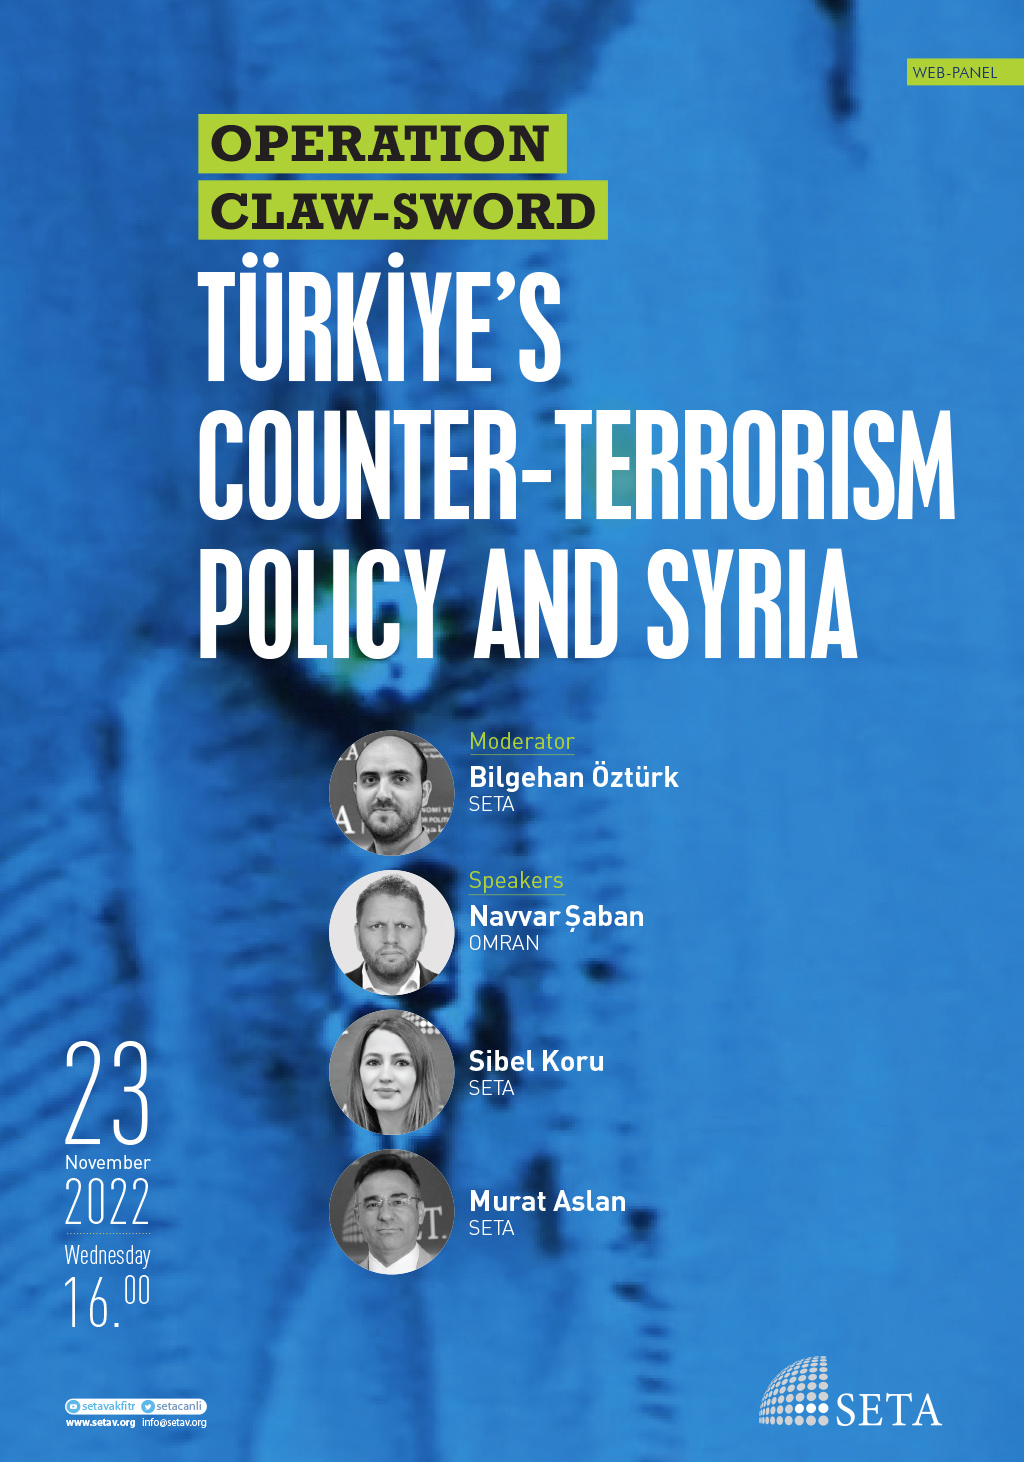 Web Panel: Operation Claw-Sword | Türkiye’s Counter-Terrorism Policy and Syria